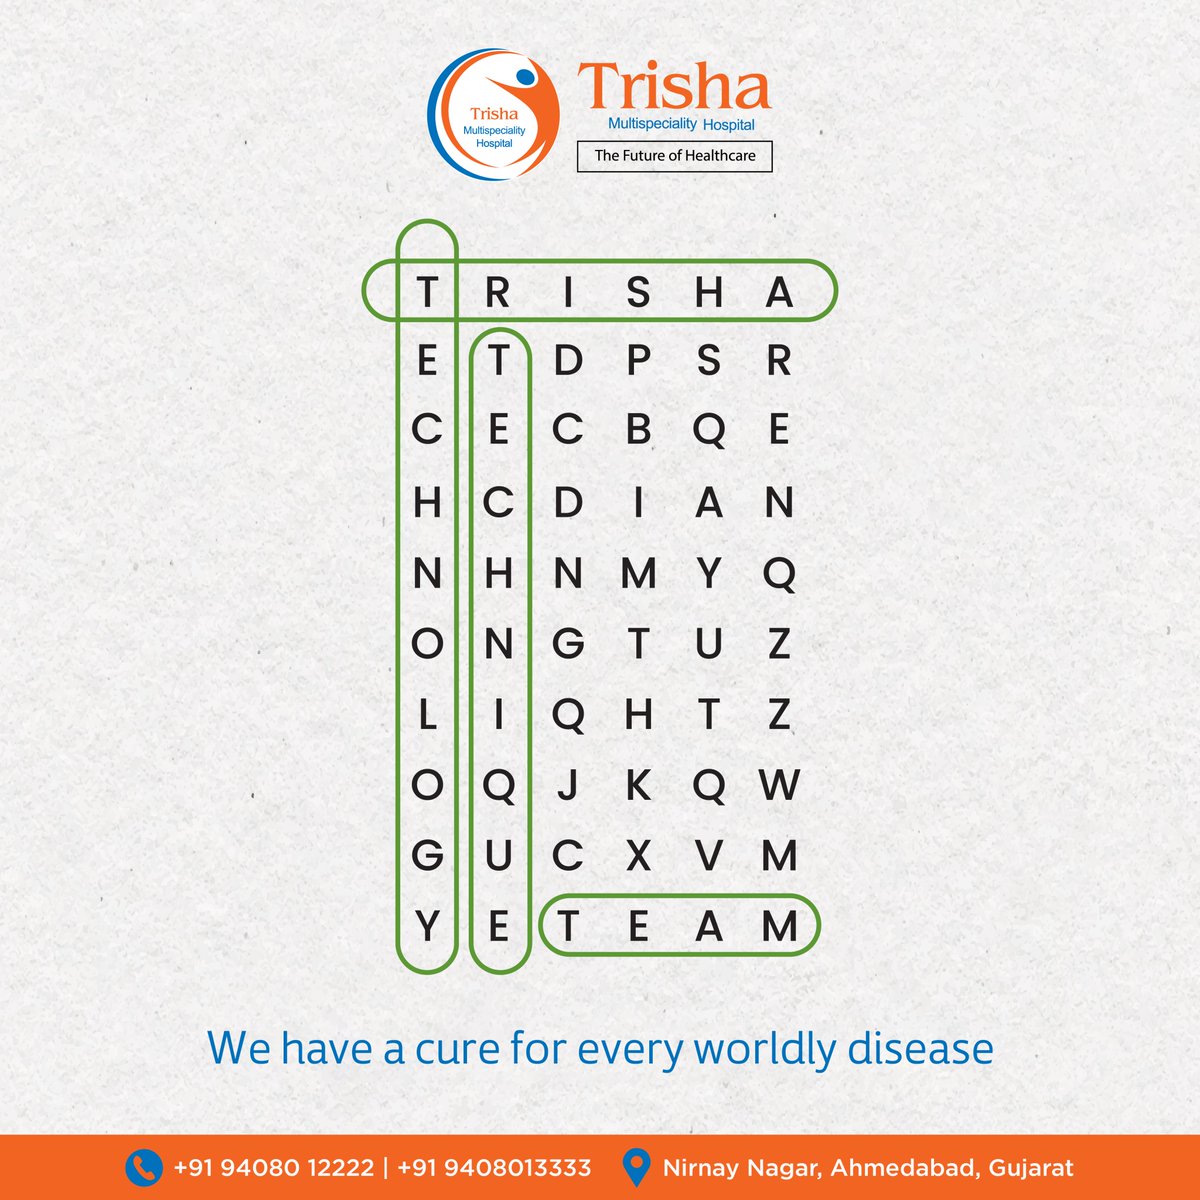 Where healing knows no bounds, and every ailment finds a cure. Welcome to Trisha Multispecialty hospital, where our team of professionals assists you in treating every disease.
#Healing #Team #Professional #BestTreatment #AffordableRates #OurStaff #OurTeam #Trustus